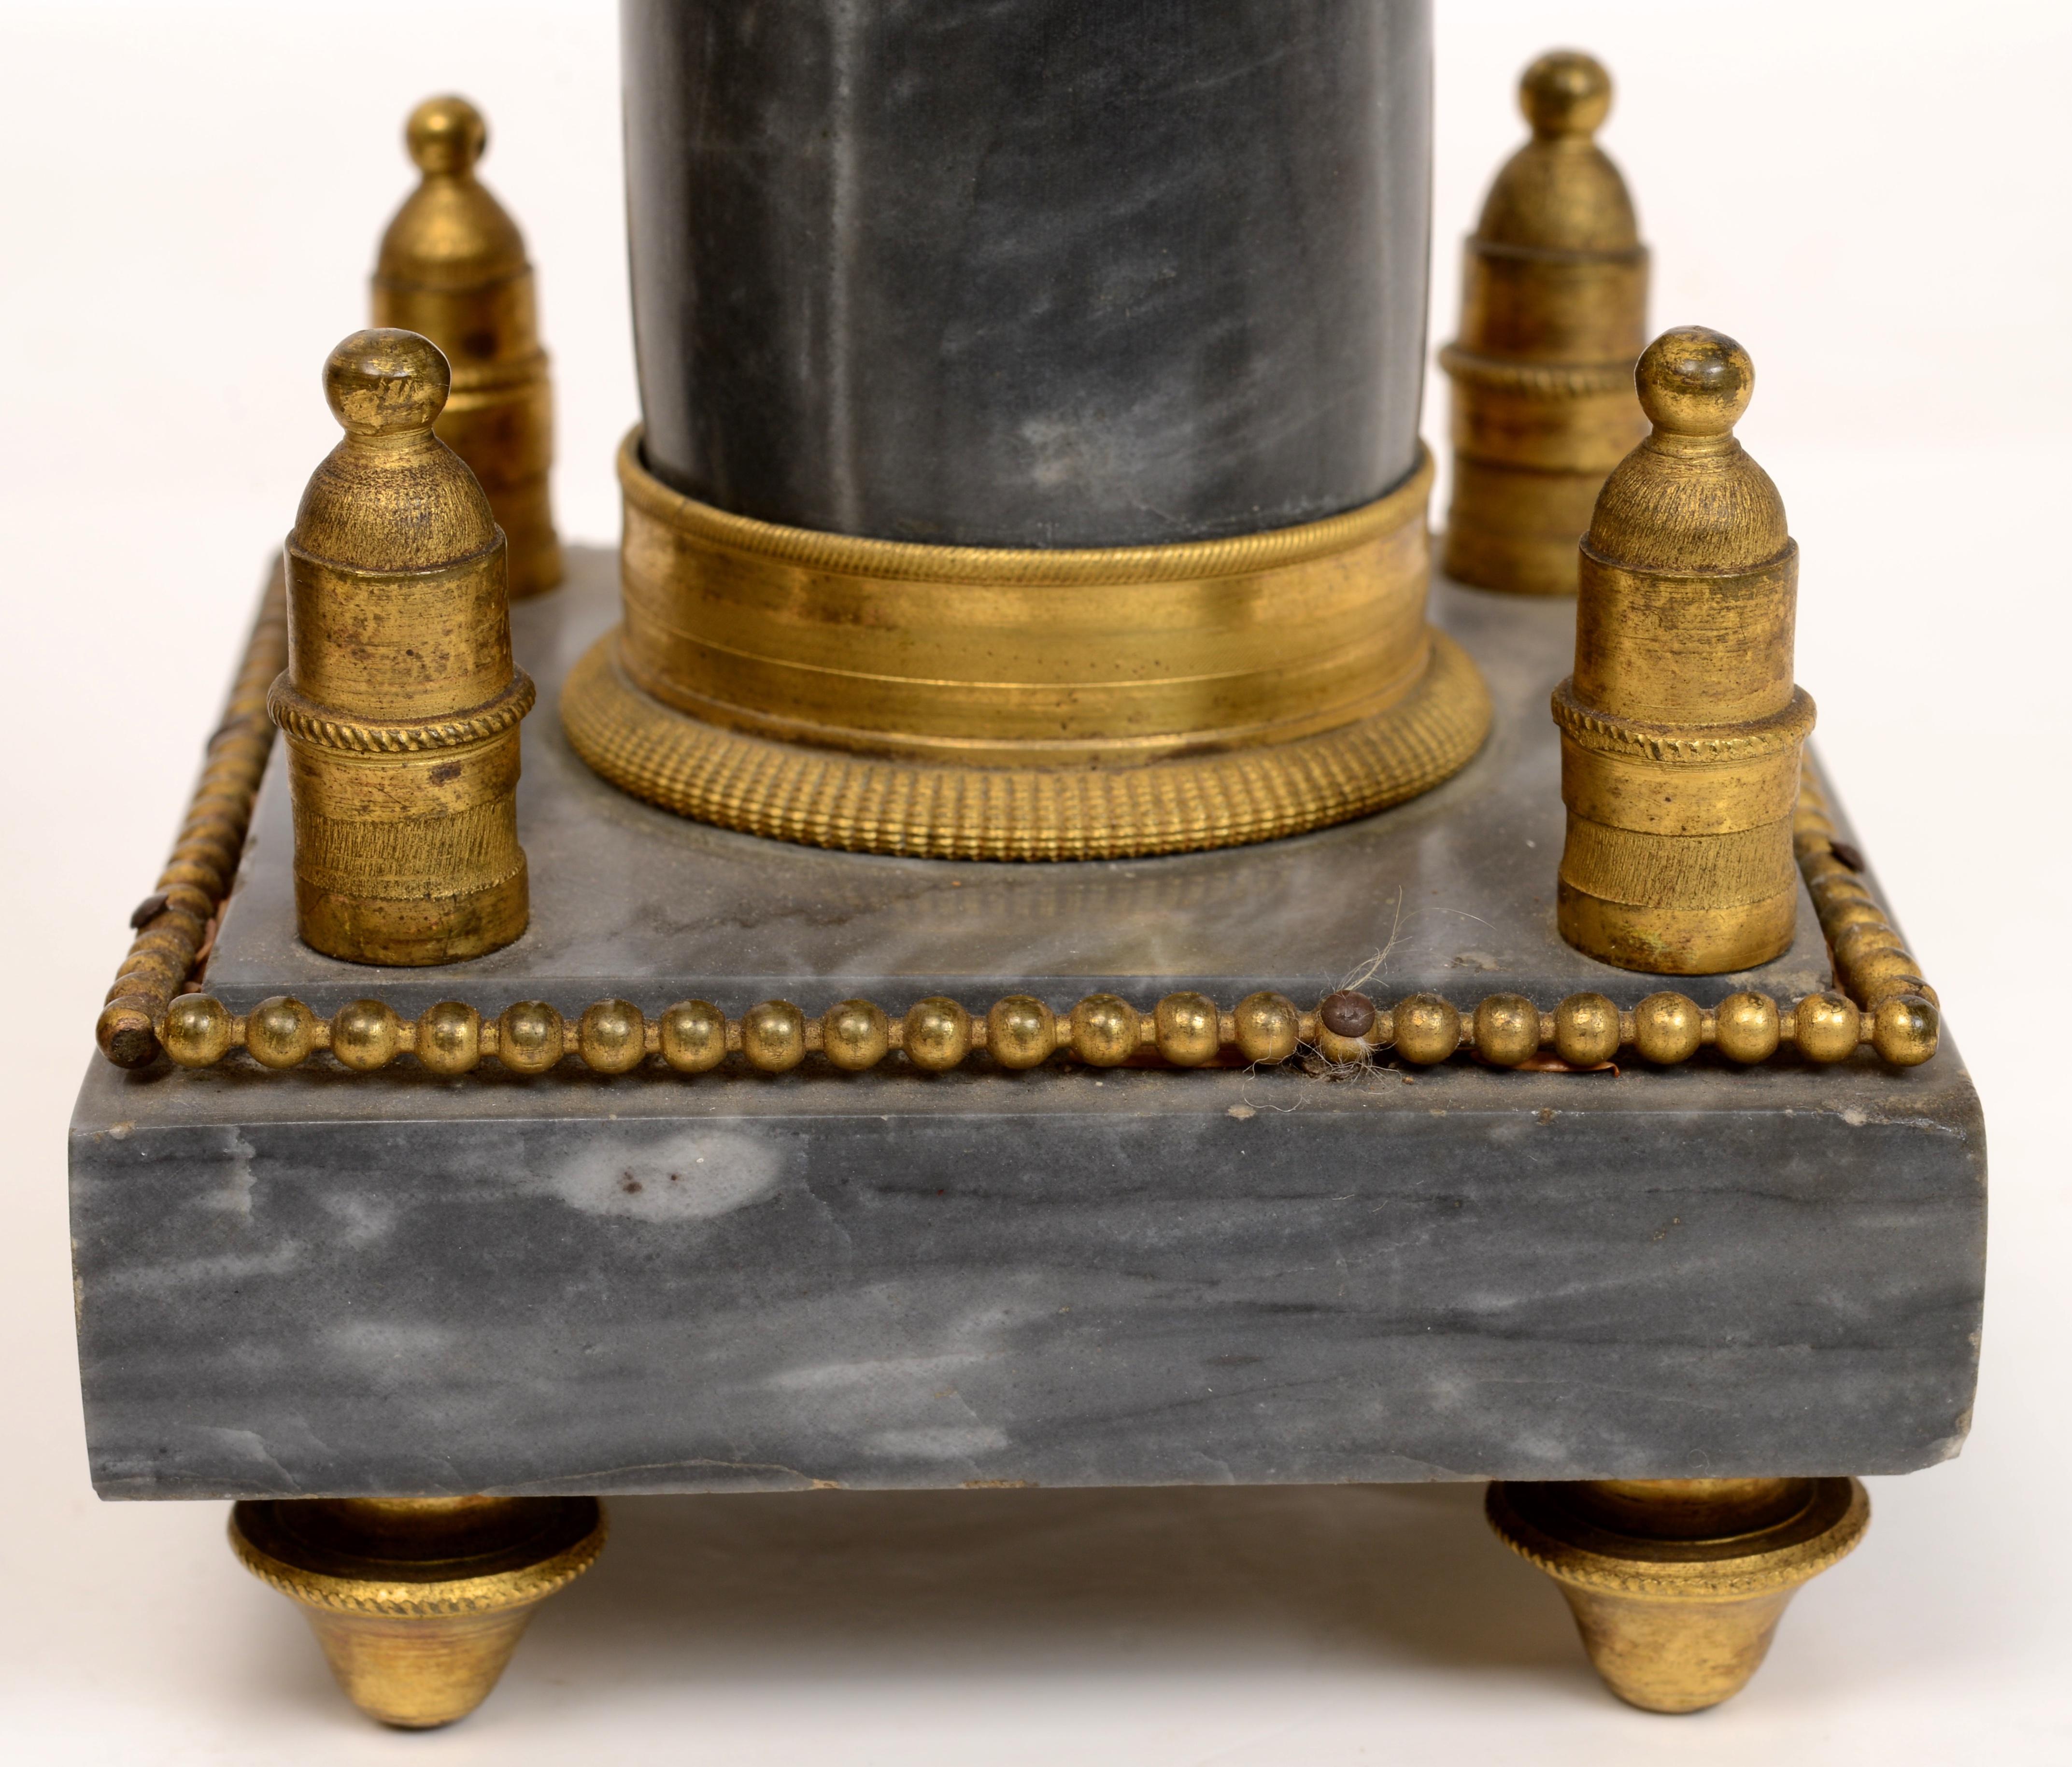 A pair of Louis XVI gilt bronze mounted gray and white mottled marble obelisks c1785. The base mounted with bollards in the corners. The body mounted with gilt bronze fittings. Probably adapted from a portico clock with a trace of earlier fittings.